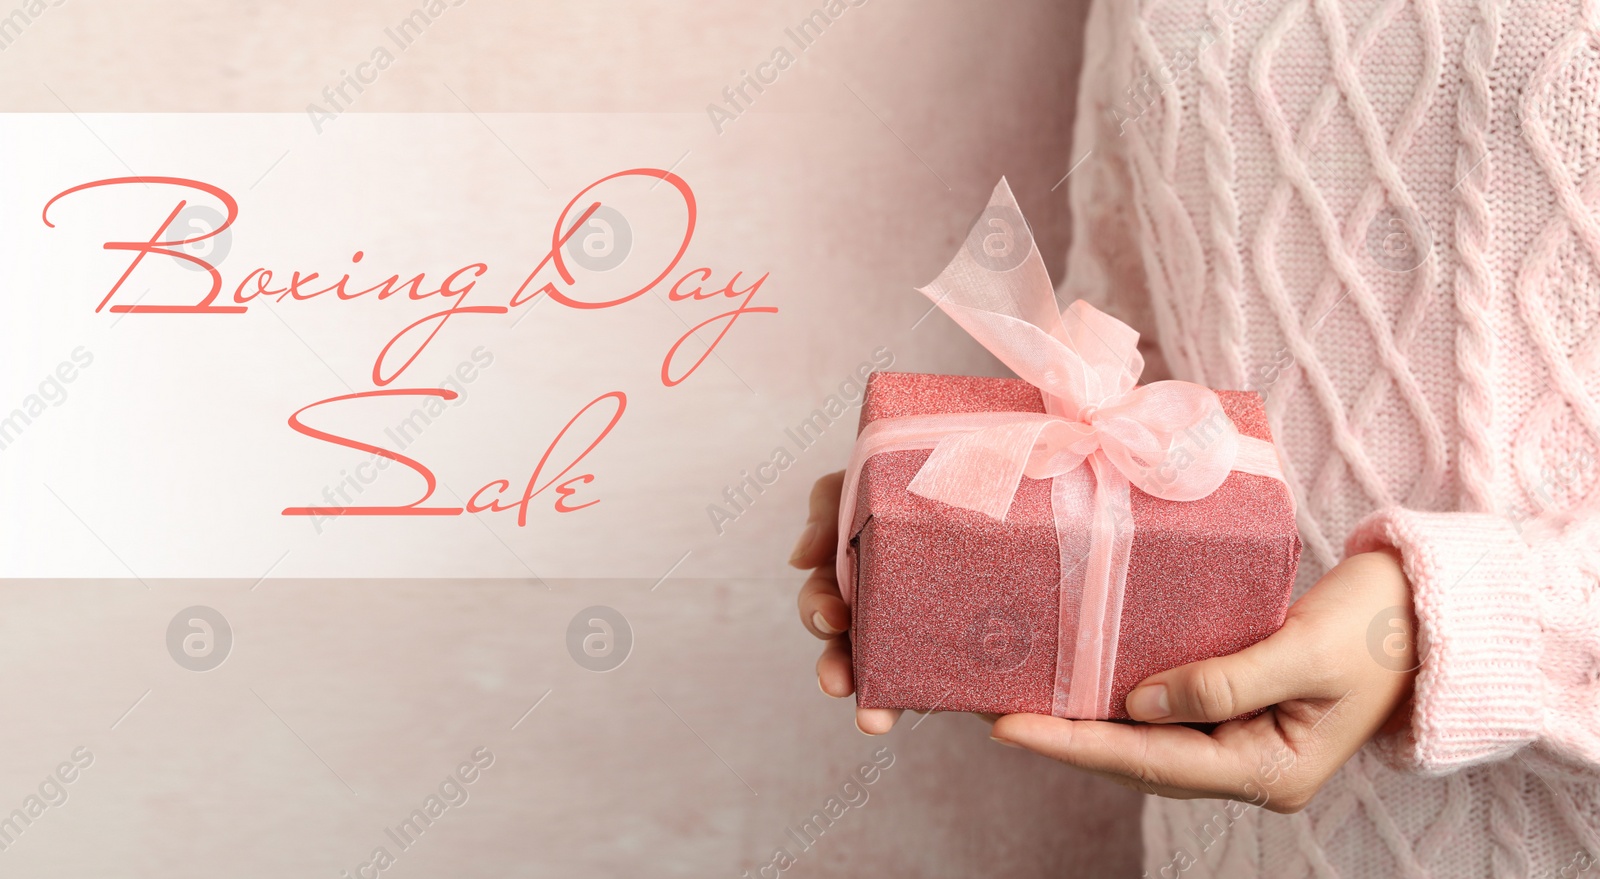 Image of Boxing day sale. Woman with gift on light background, banner design